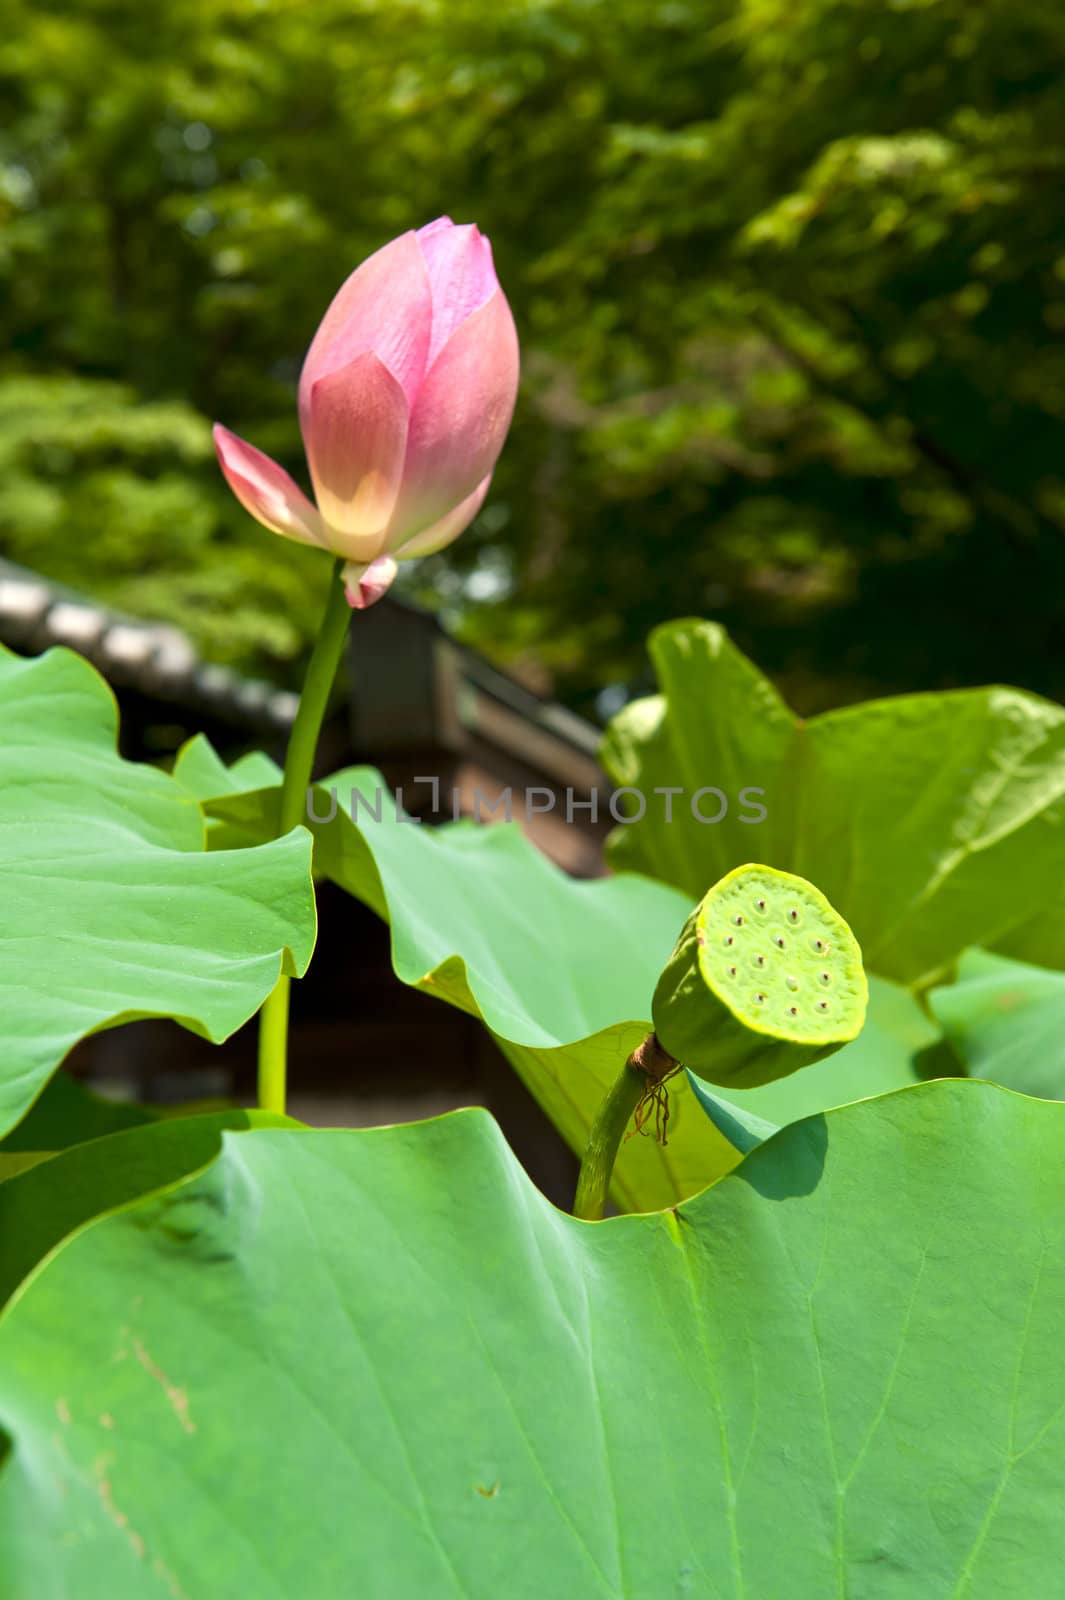 Lotus (Nelumbo nucifera) flower  with a fruit in the Japanese pond